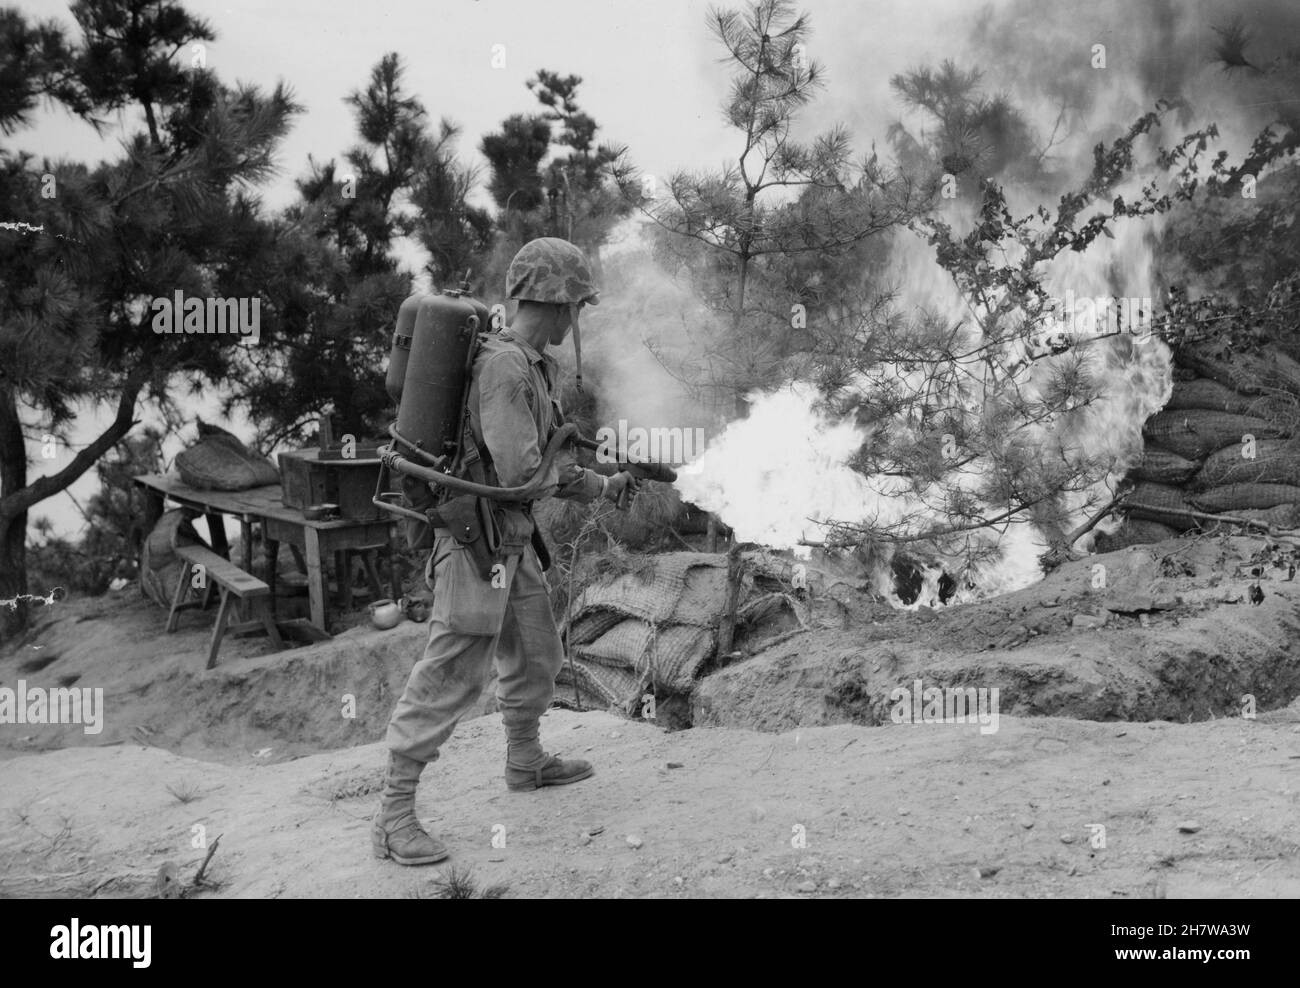 WOLMI ISLAND, KOREA - September 1950 - A US Marine uses a flamethrower to clear a bunker on Wolmi Island before pushing on to Inchon during the Korean Stock Photo